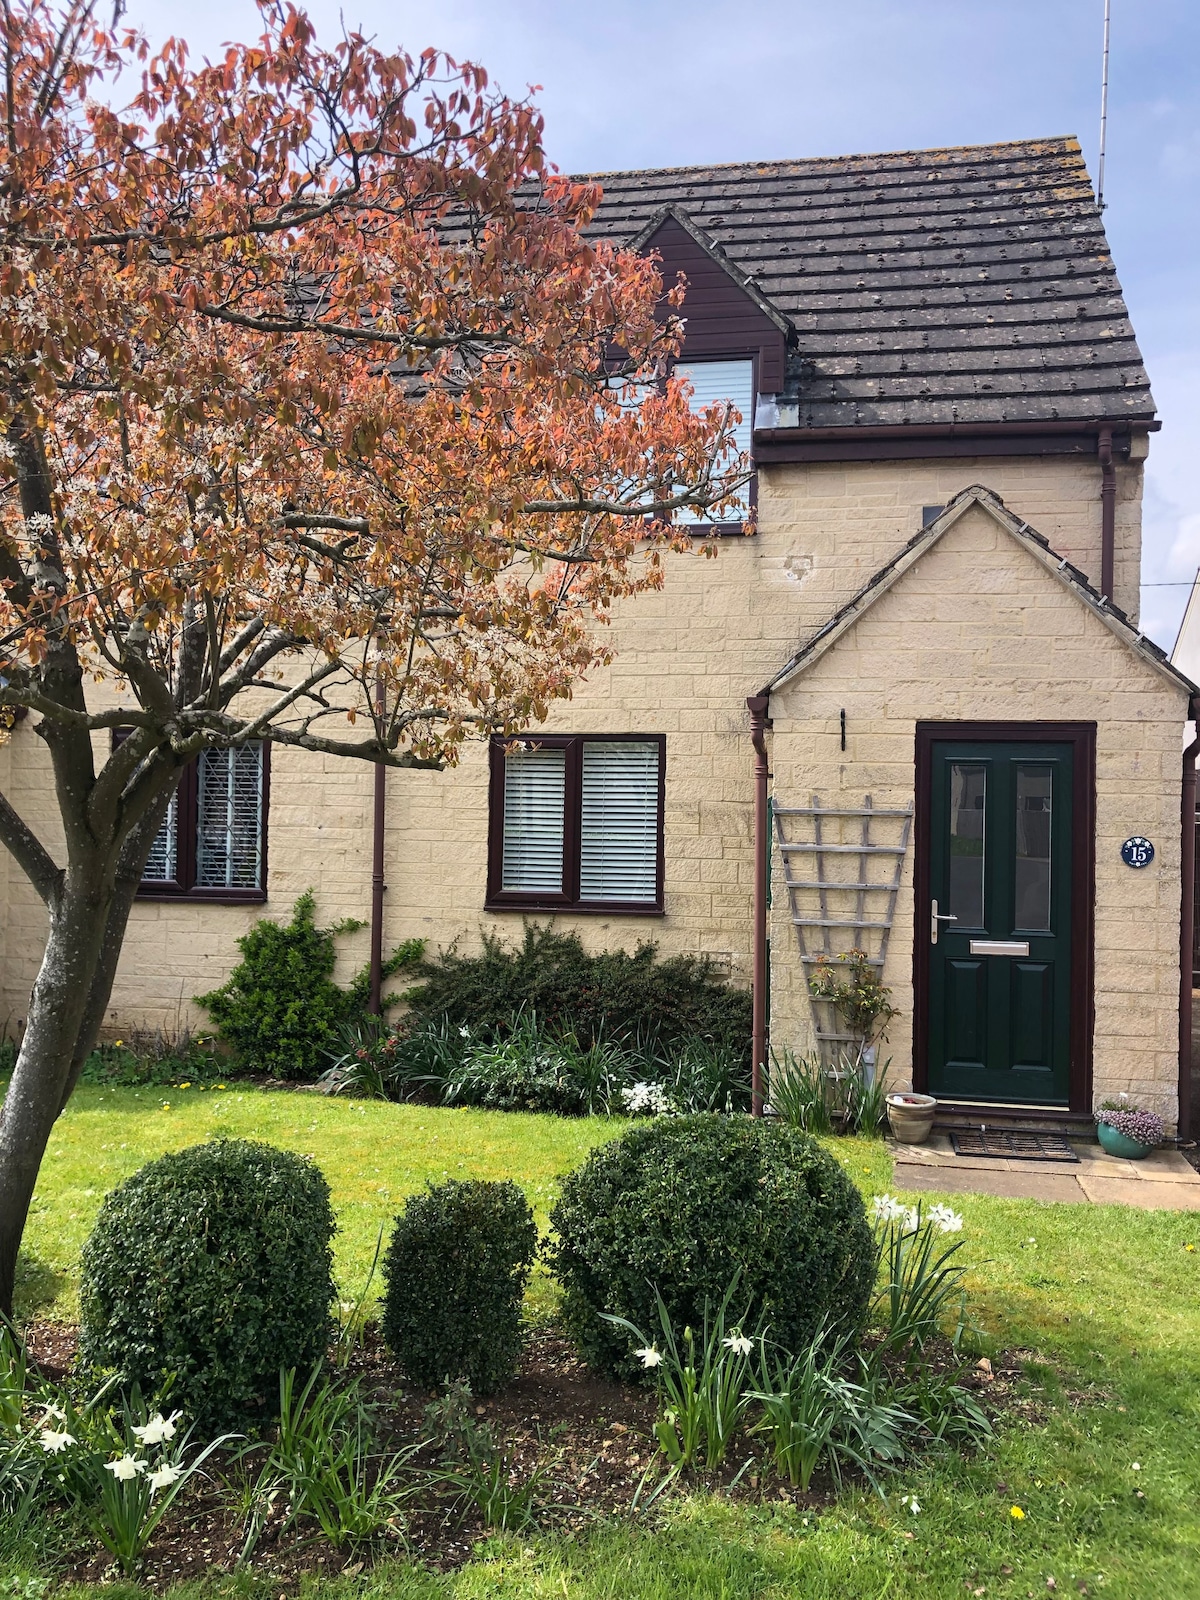 Two bed home in Moreton In Marsh, Gloucestershire